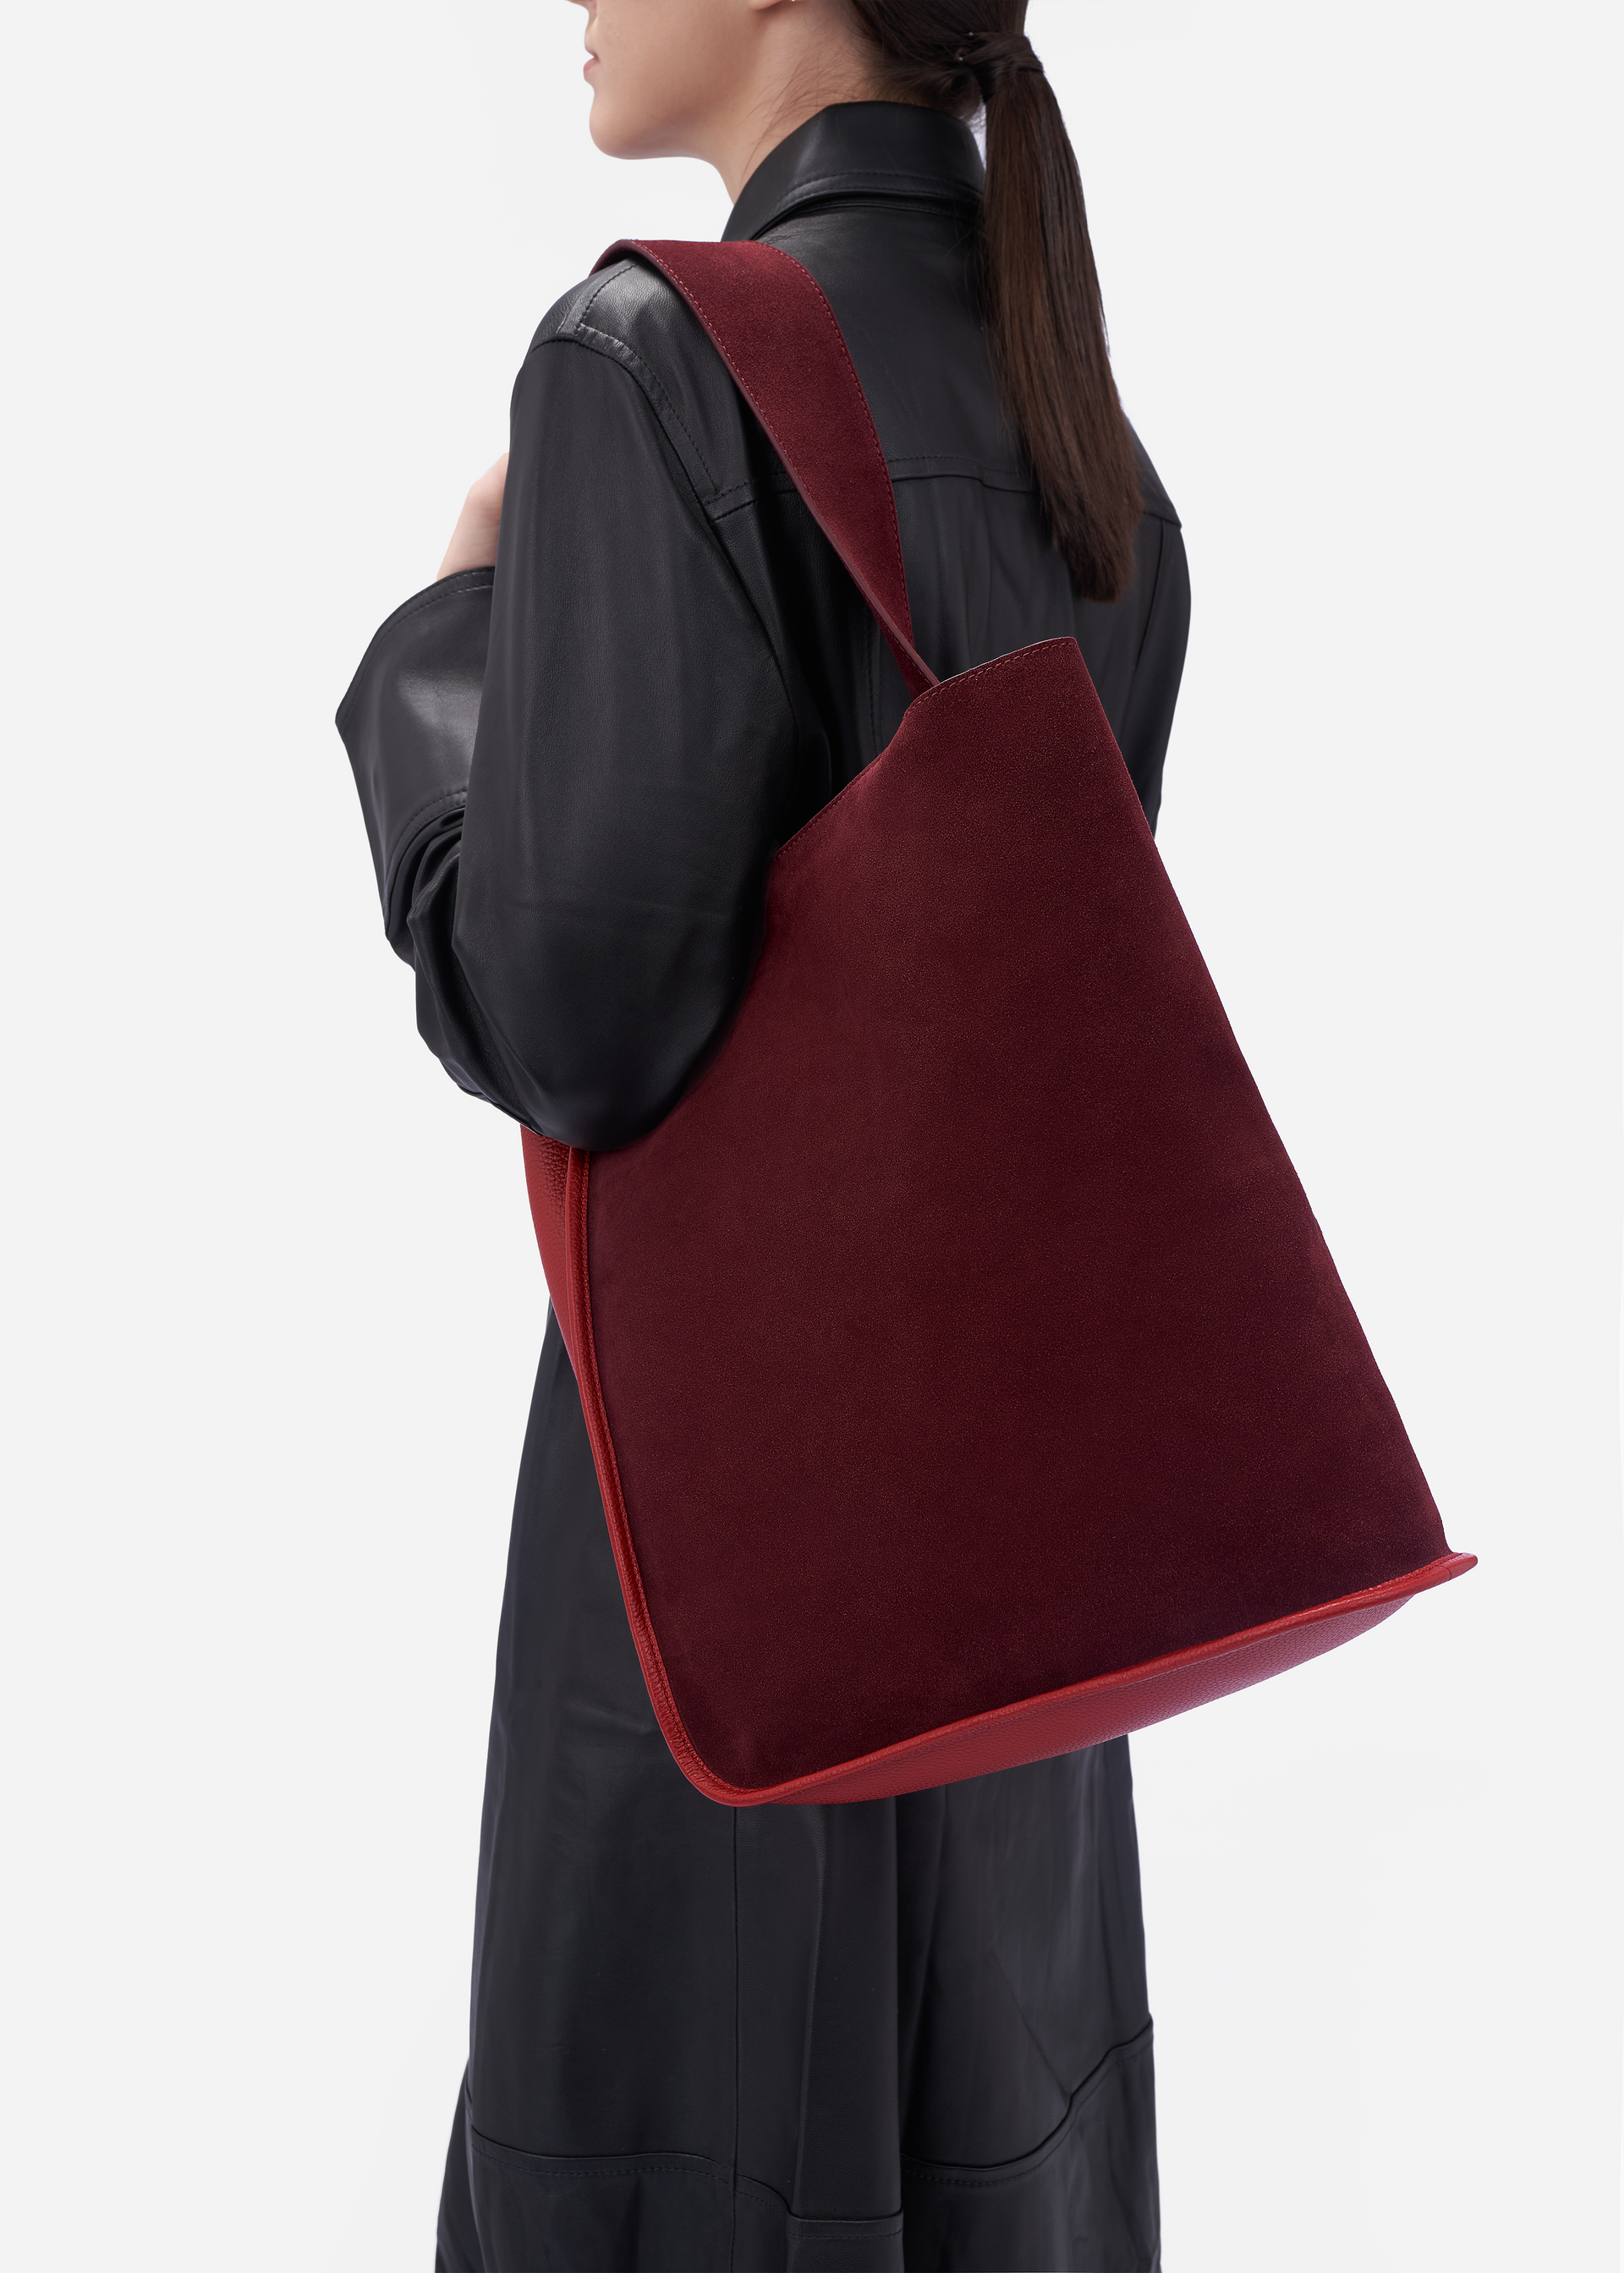 Eileen wraparound pebble leather shoulder bag in claret red / red currant